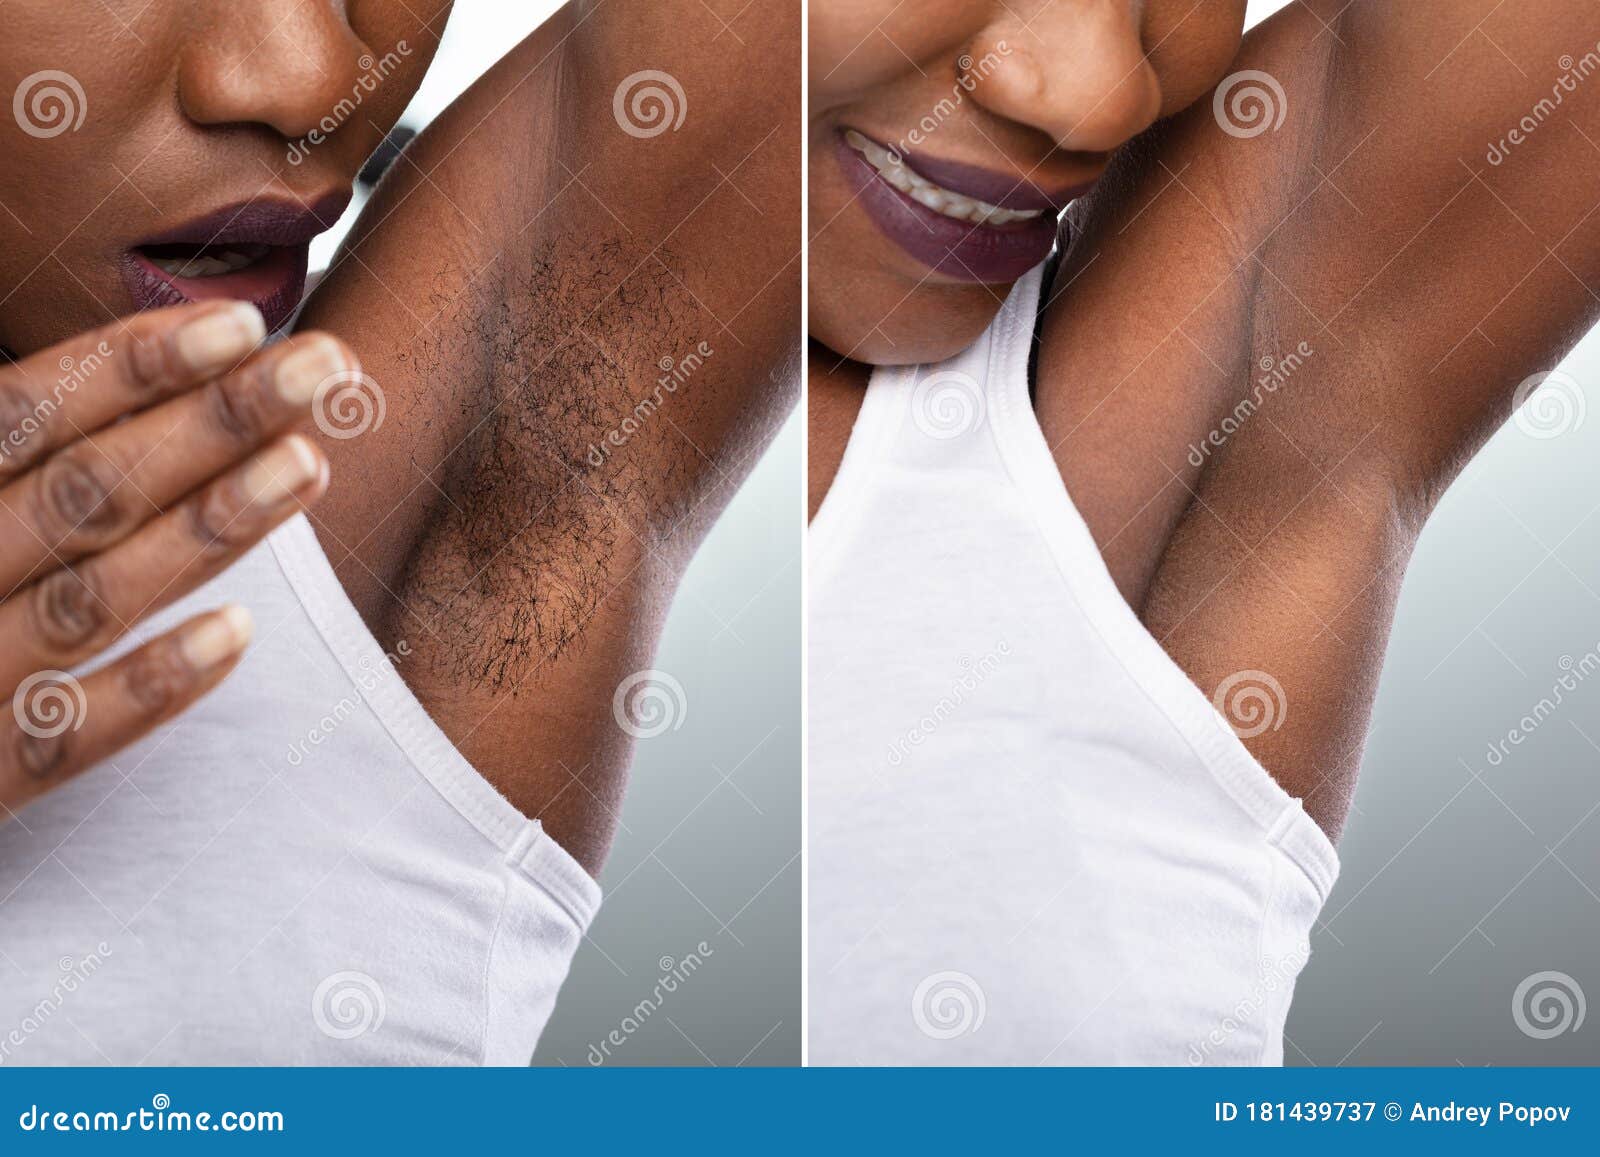 before and after concept of underarm hair removal